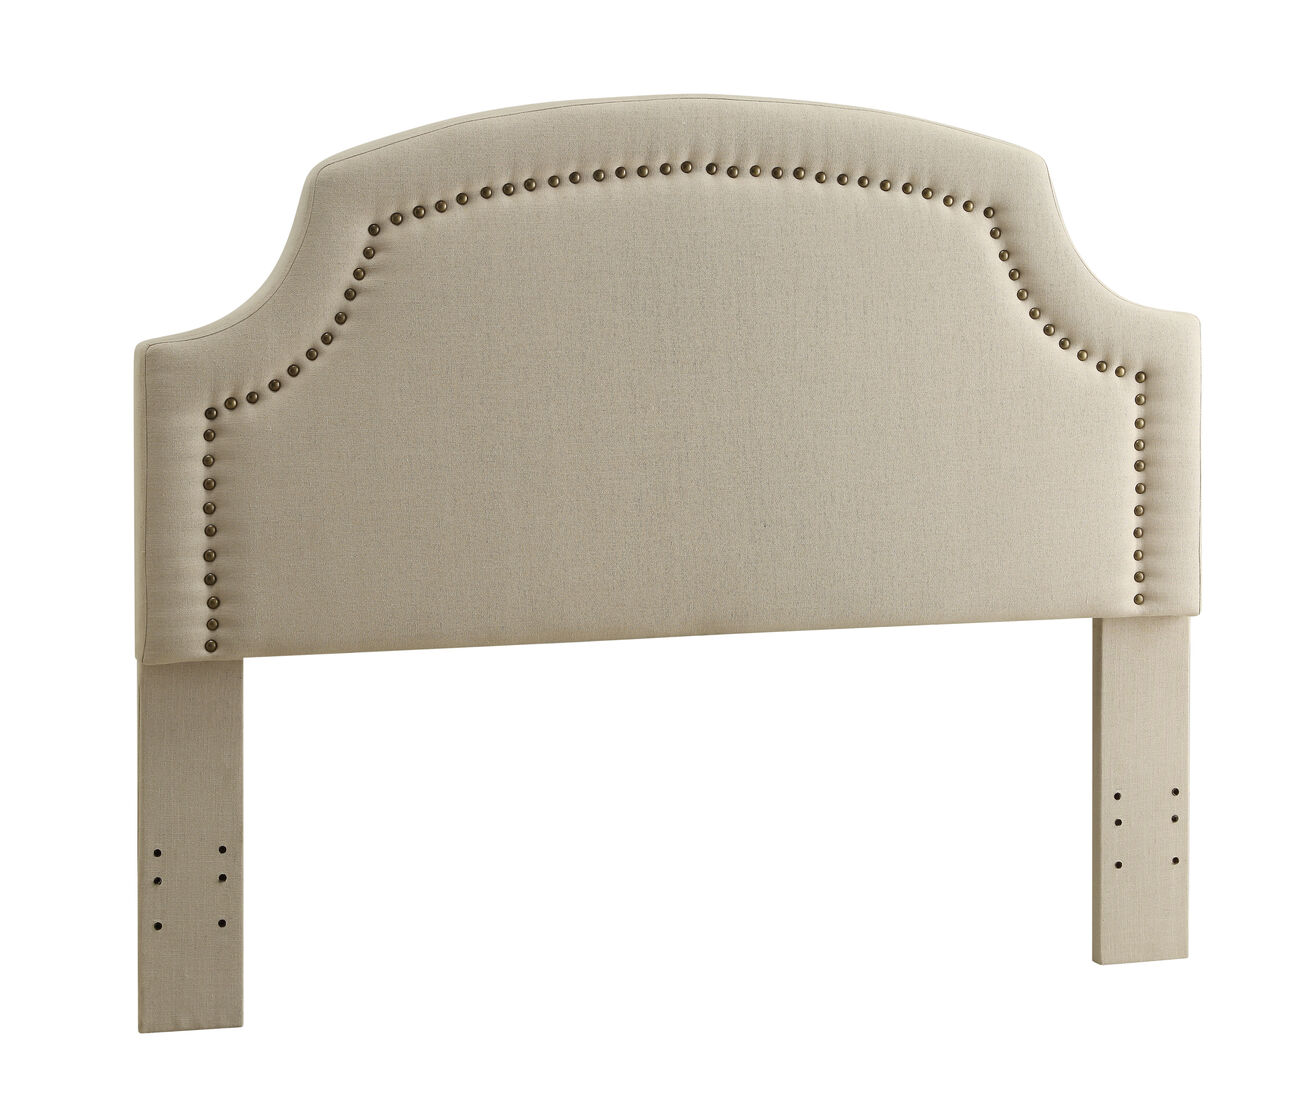 Wood and Fabric Full Queen Size Headboard with Scalloped Edges, Beige